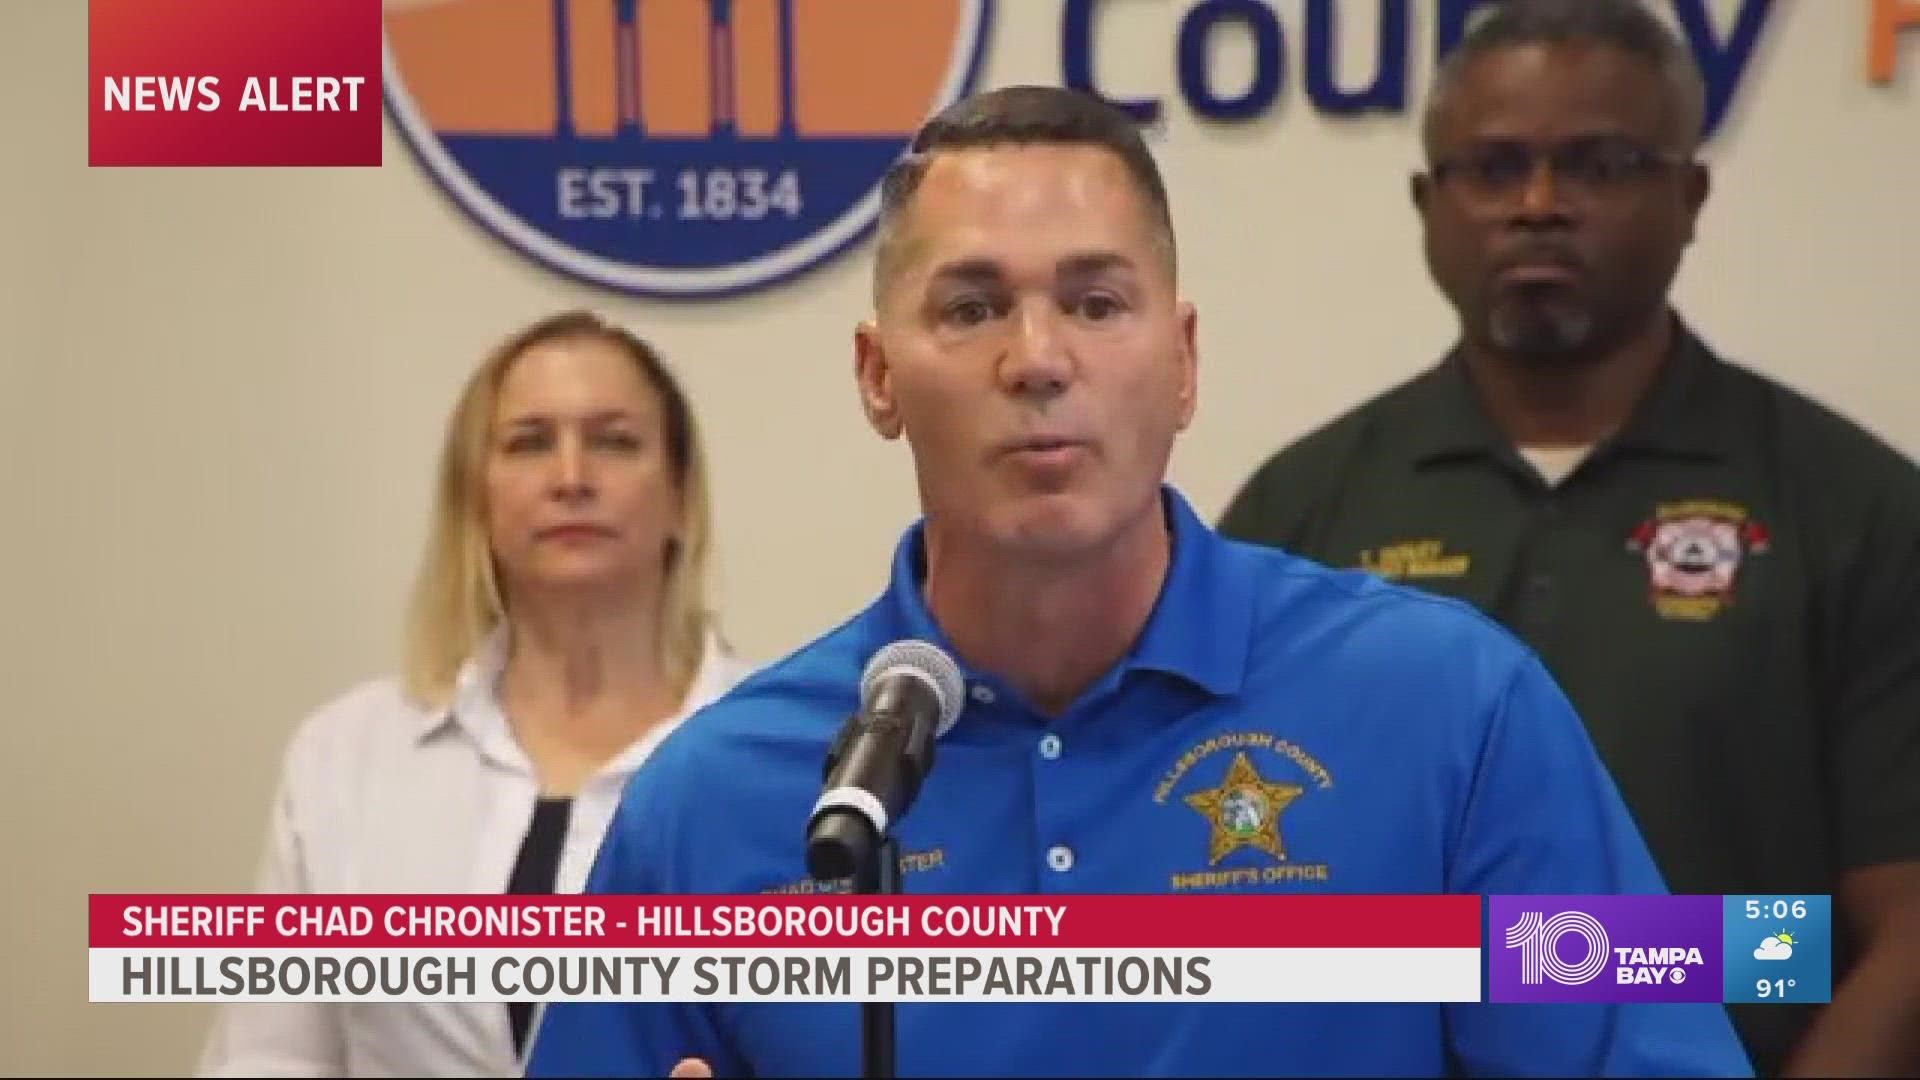 The local declarations will help ensure the counties' emergency management can effectively handle preparation and response to the storm's impacts.